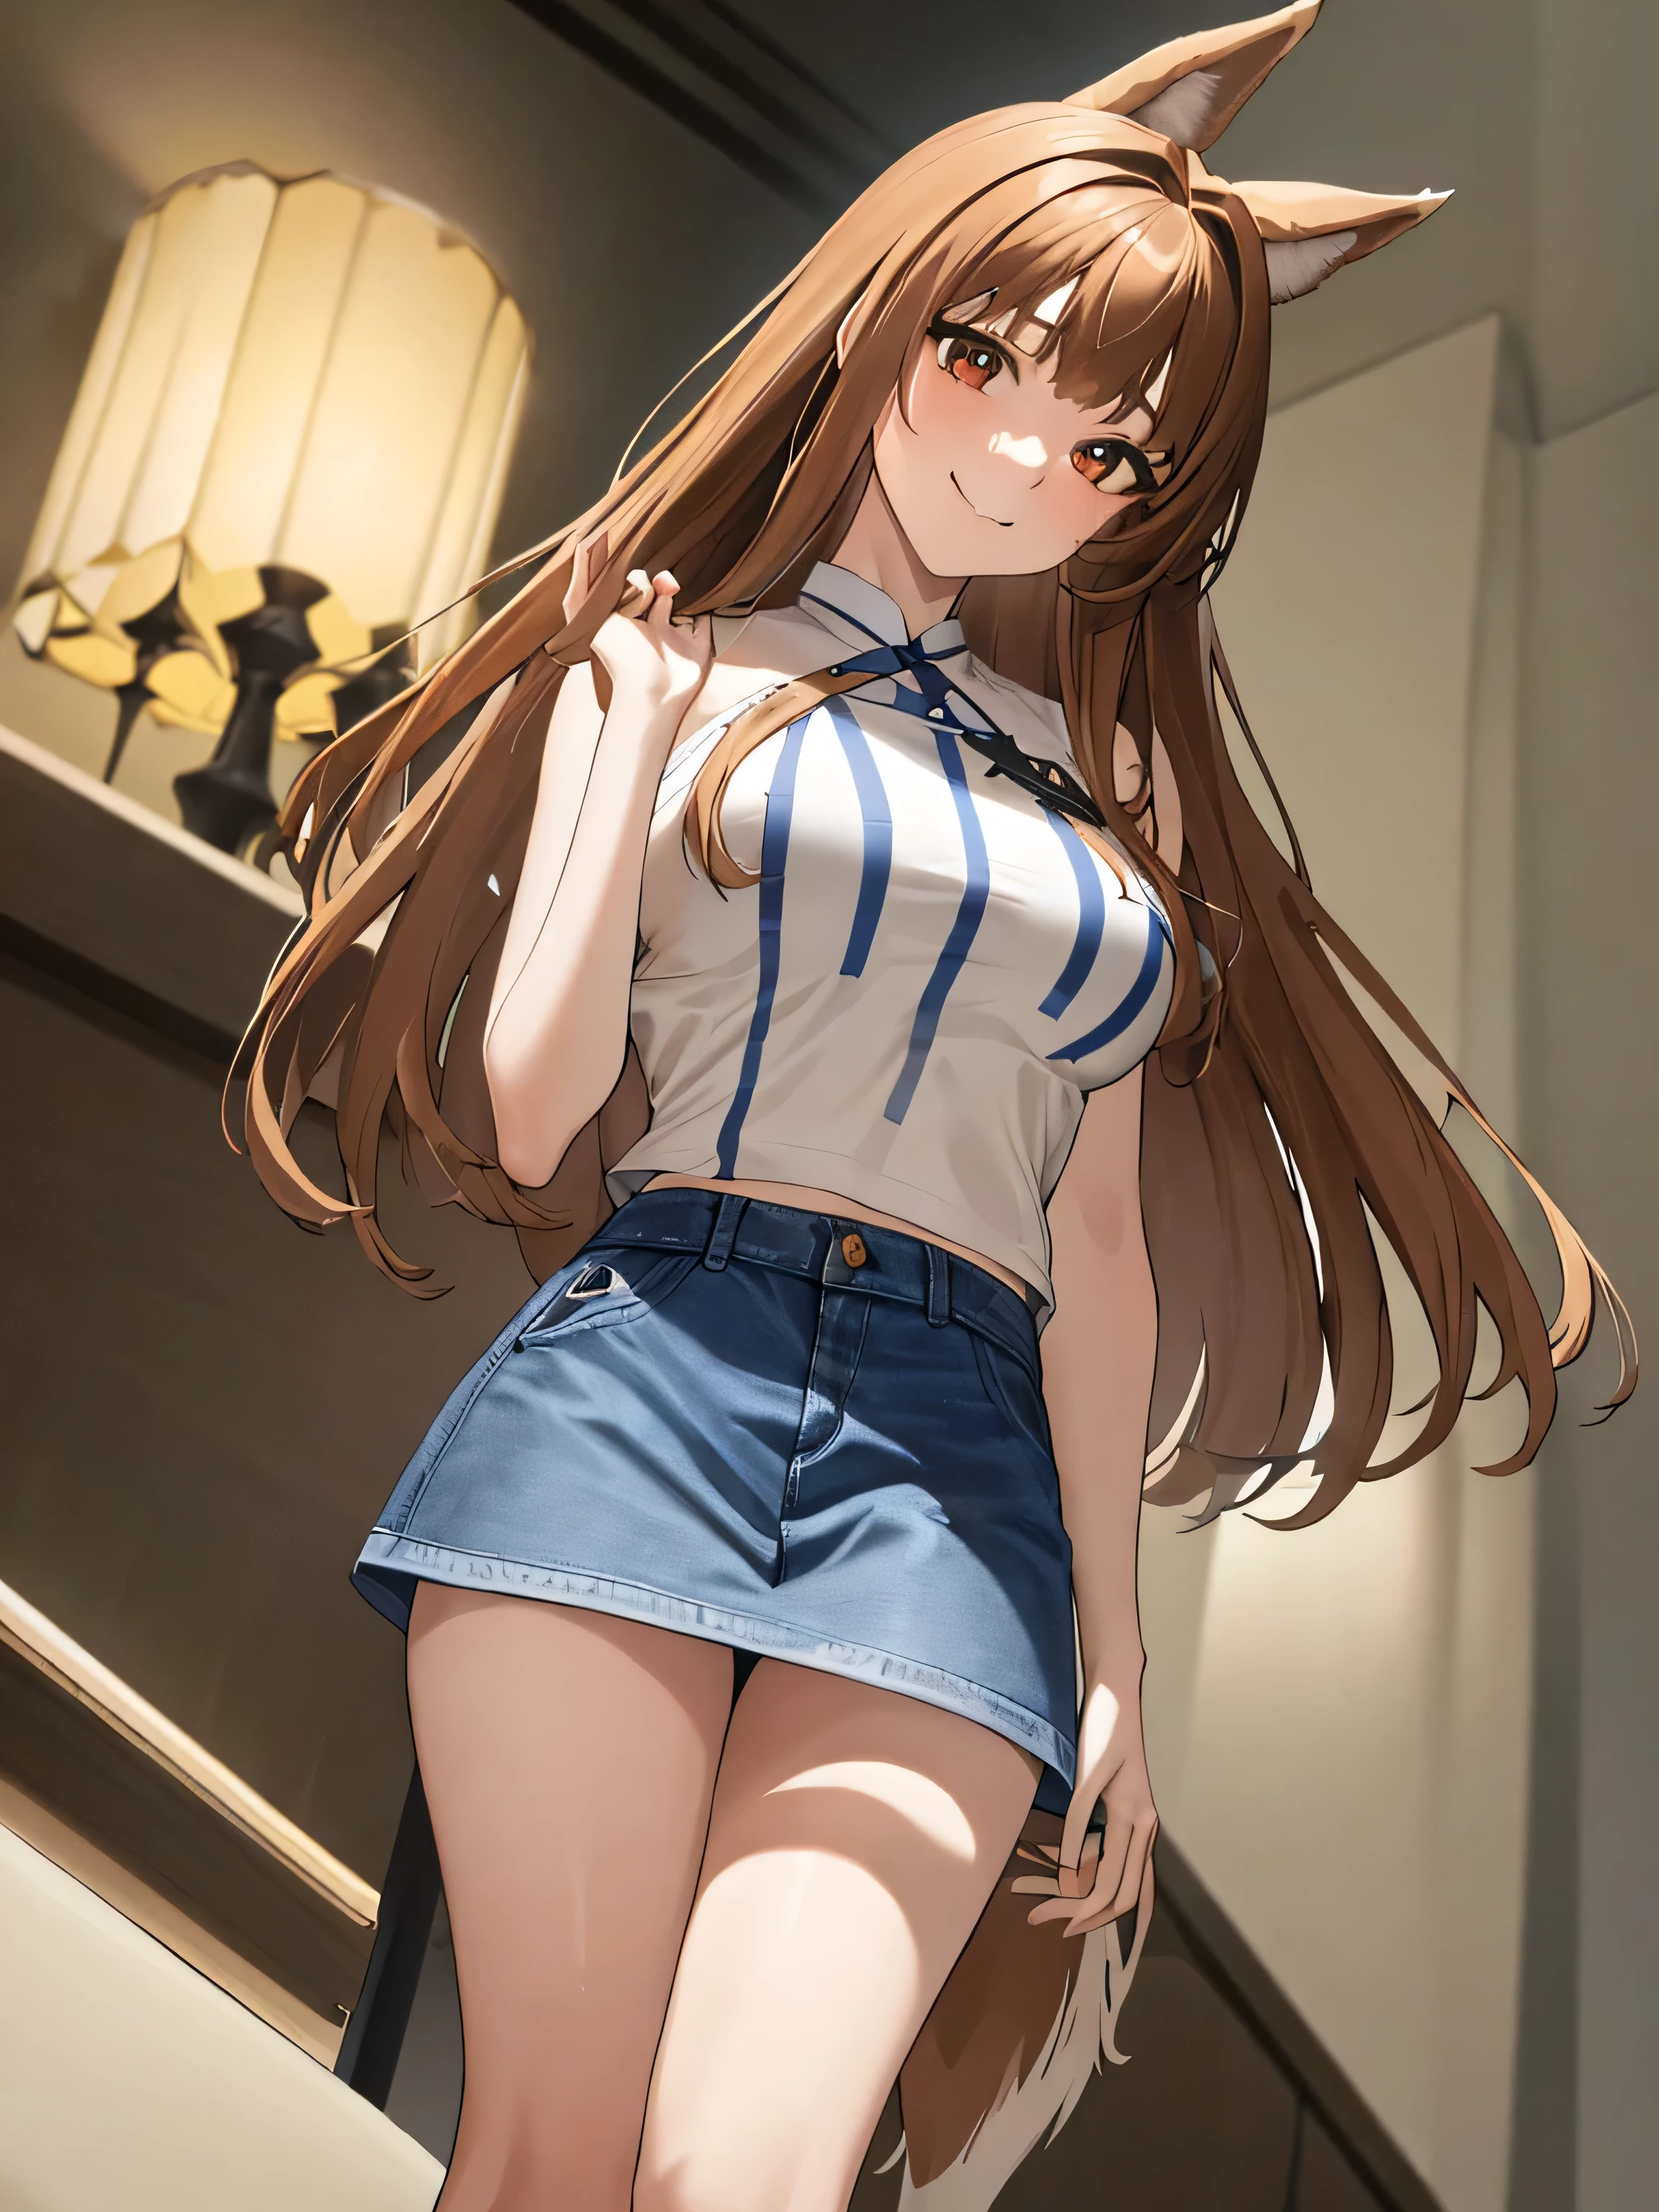 masterpiece, highest quality:1.2), Wheat field, holo, alone,Are standing, (SEXY Pose), Long Hair, Brown Hair, Dog ears, smile, (Large Breasts:1.2), White Mini＿bra, (Panties are visible:1.6, small, White), (mini skirt:1.4, Brown leather), (Fluffy tail grows,From the waist)